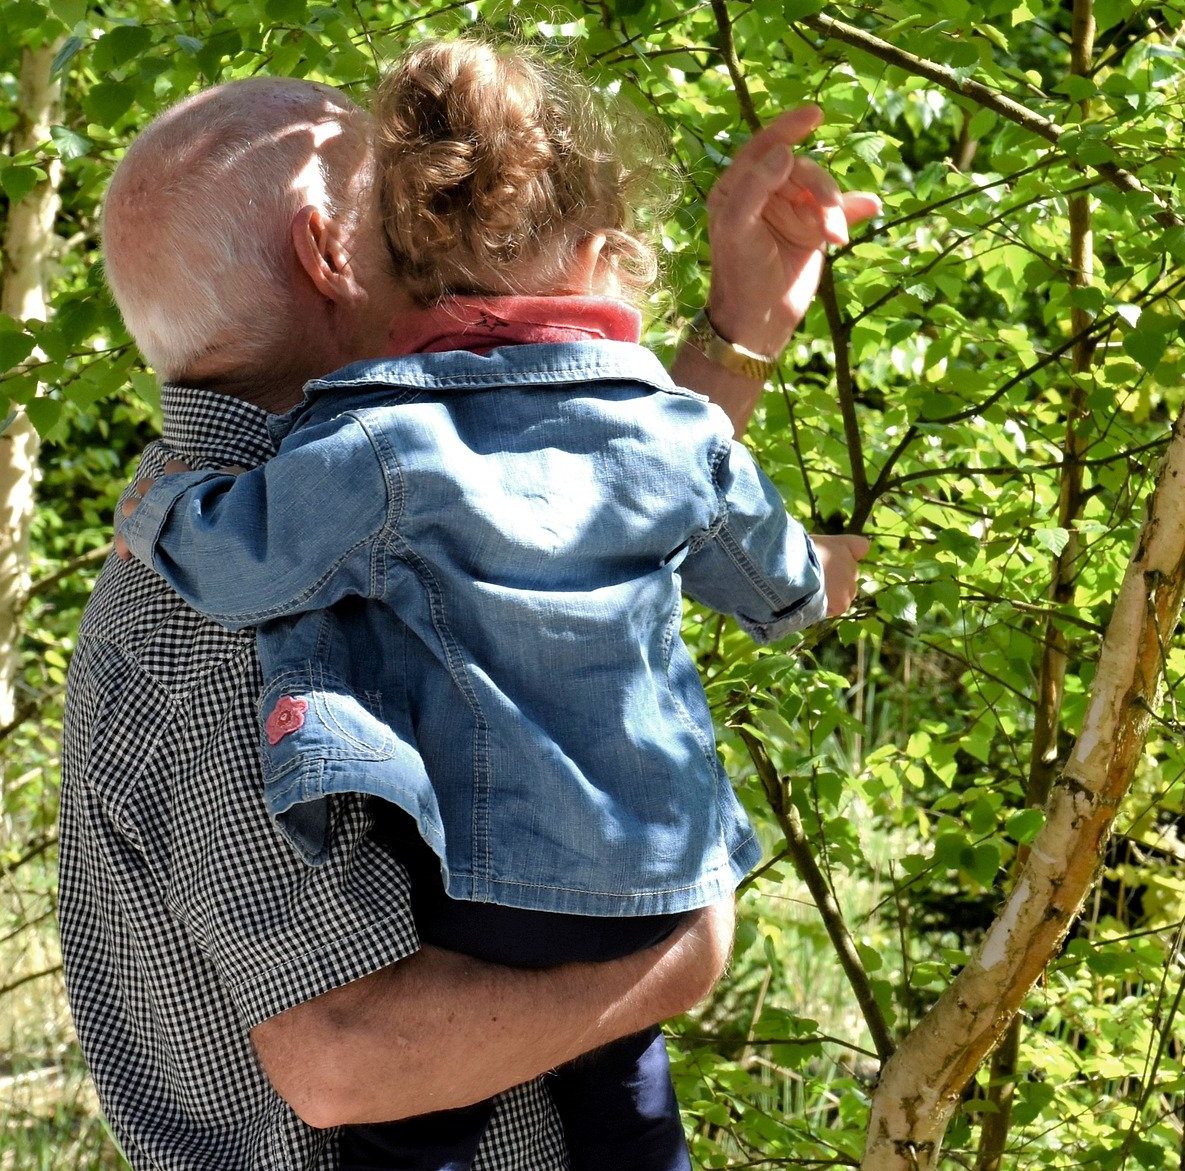 Grandfather holding his grandaughter in the garden looking at the leaves on a tree, it is a bright and sunny day